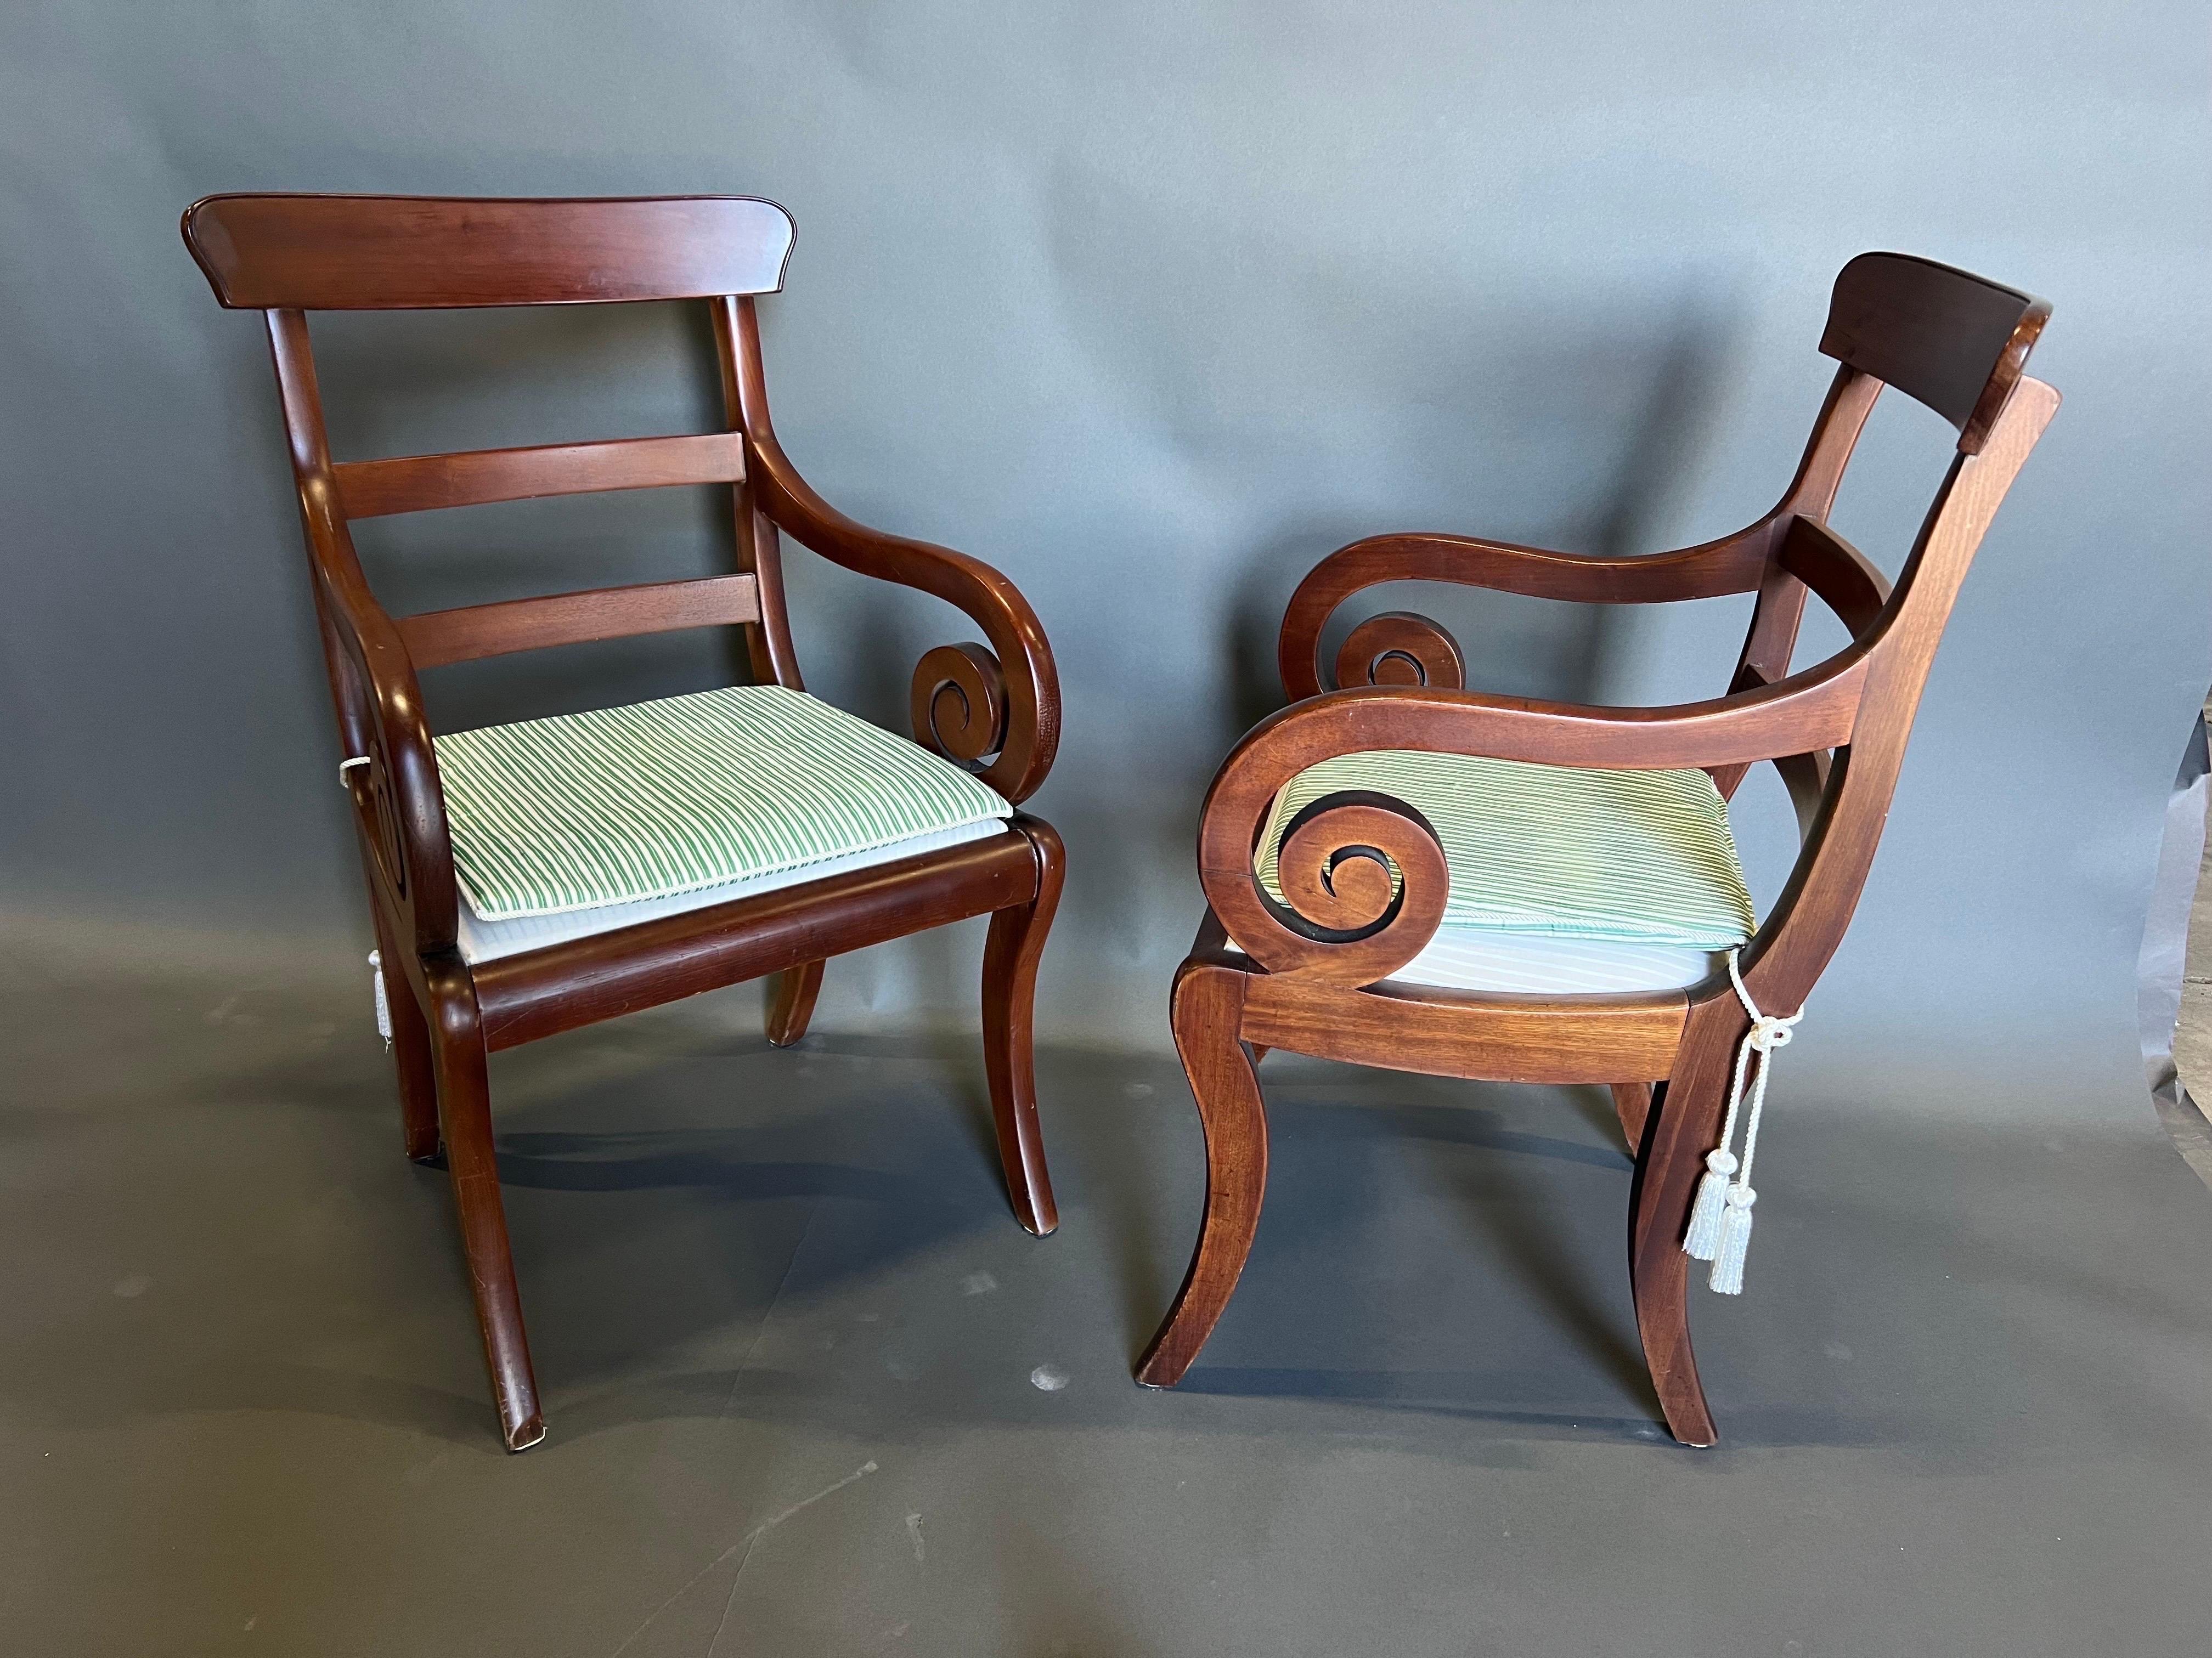 Great set of 8 19th century English mahogany armchairs. All 8 chairs are armchairs and sit very comfortably. Upholstered seats could be redone- currently 4 have one pattern and the other 4 have a different pattern as were used in two different rooms